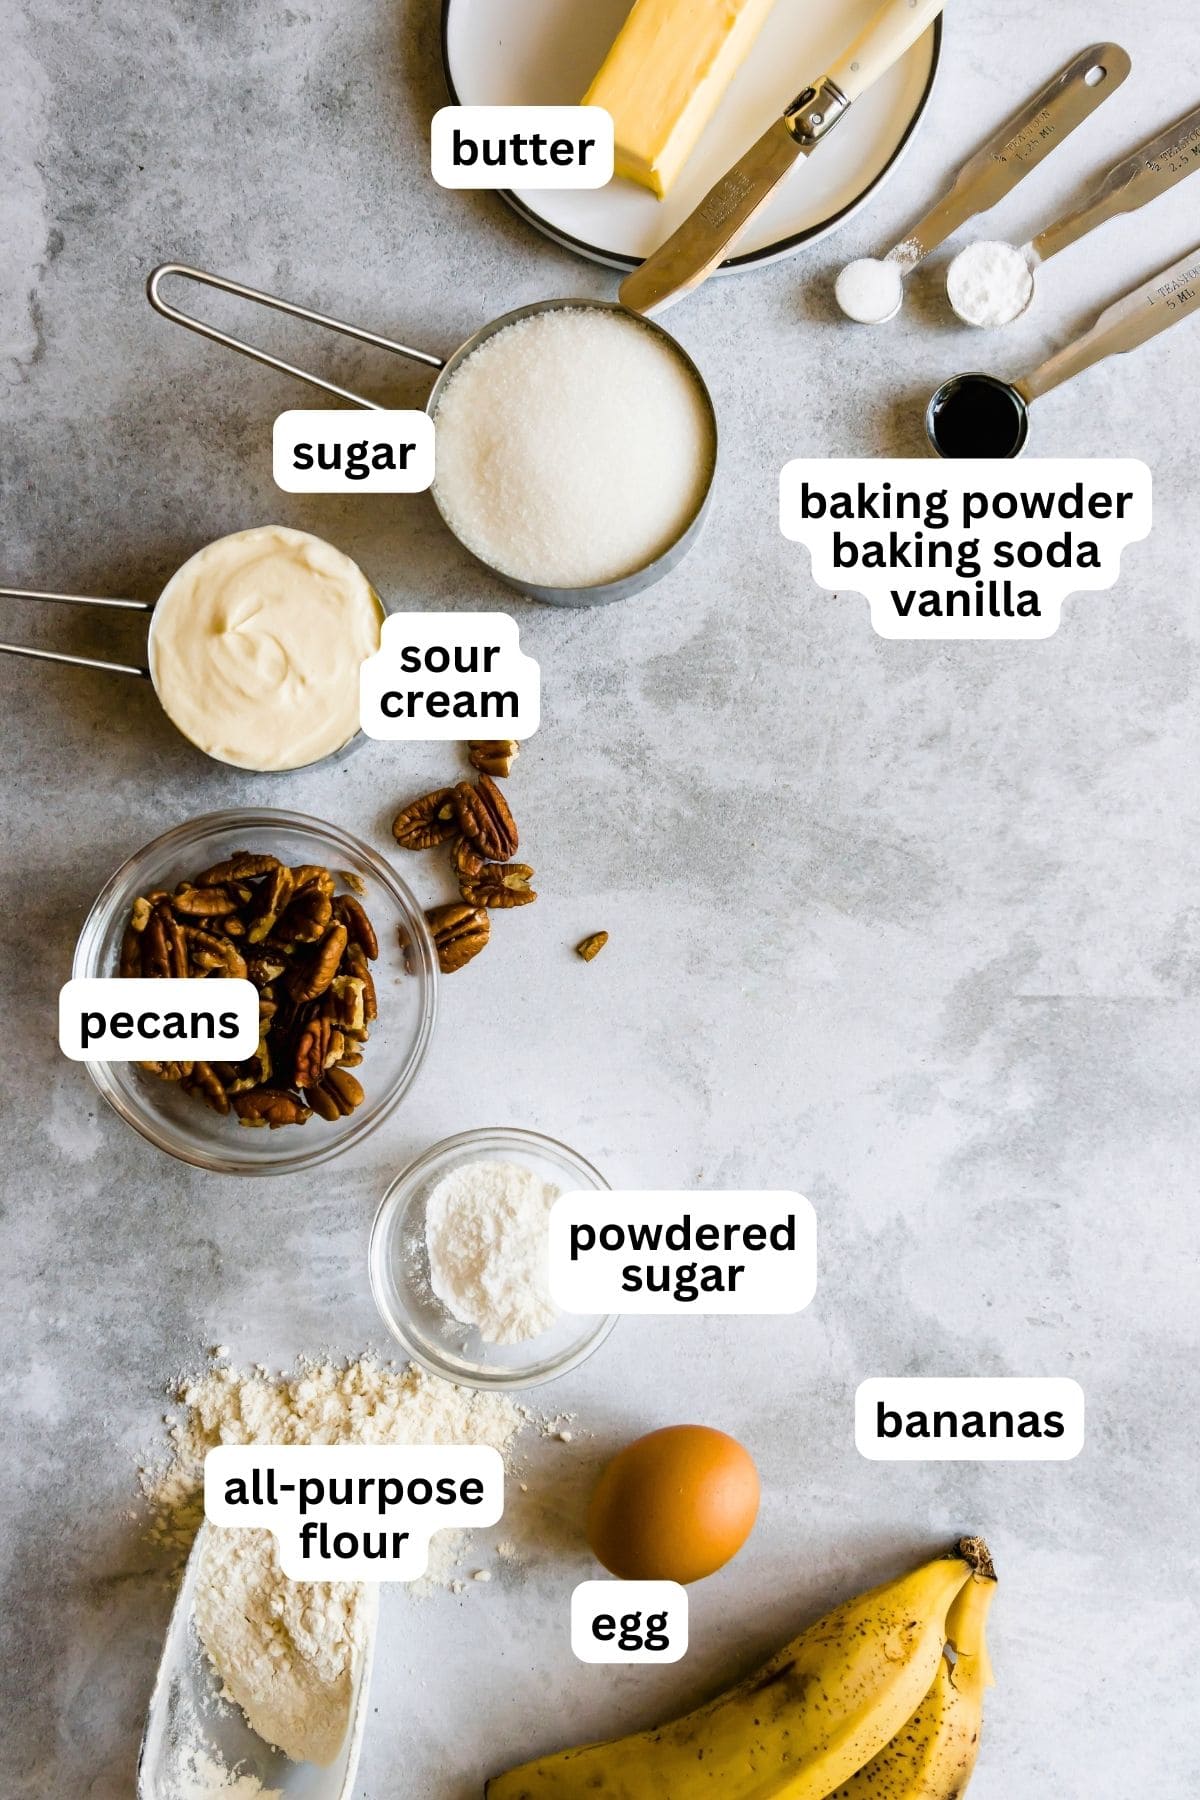 Overhead view of ingredients for banana cake.